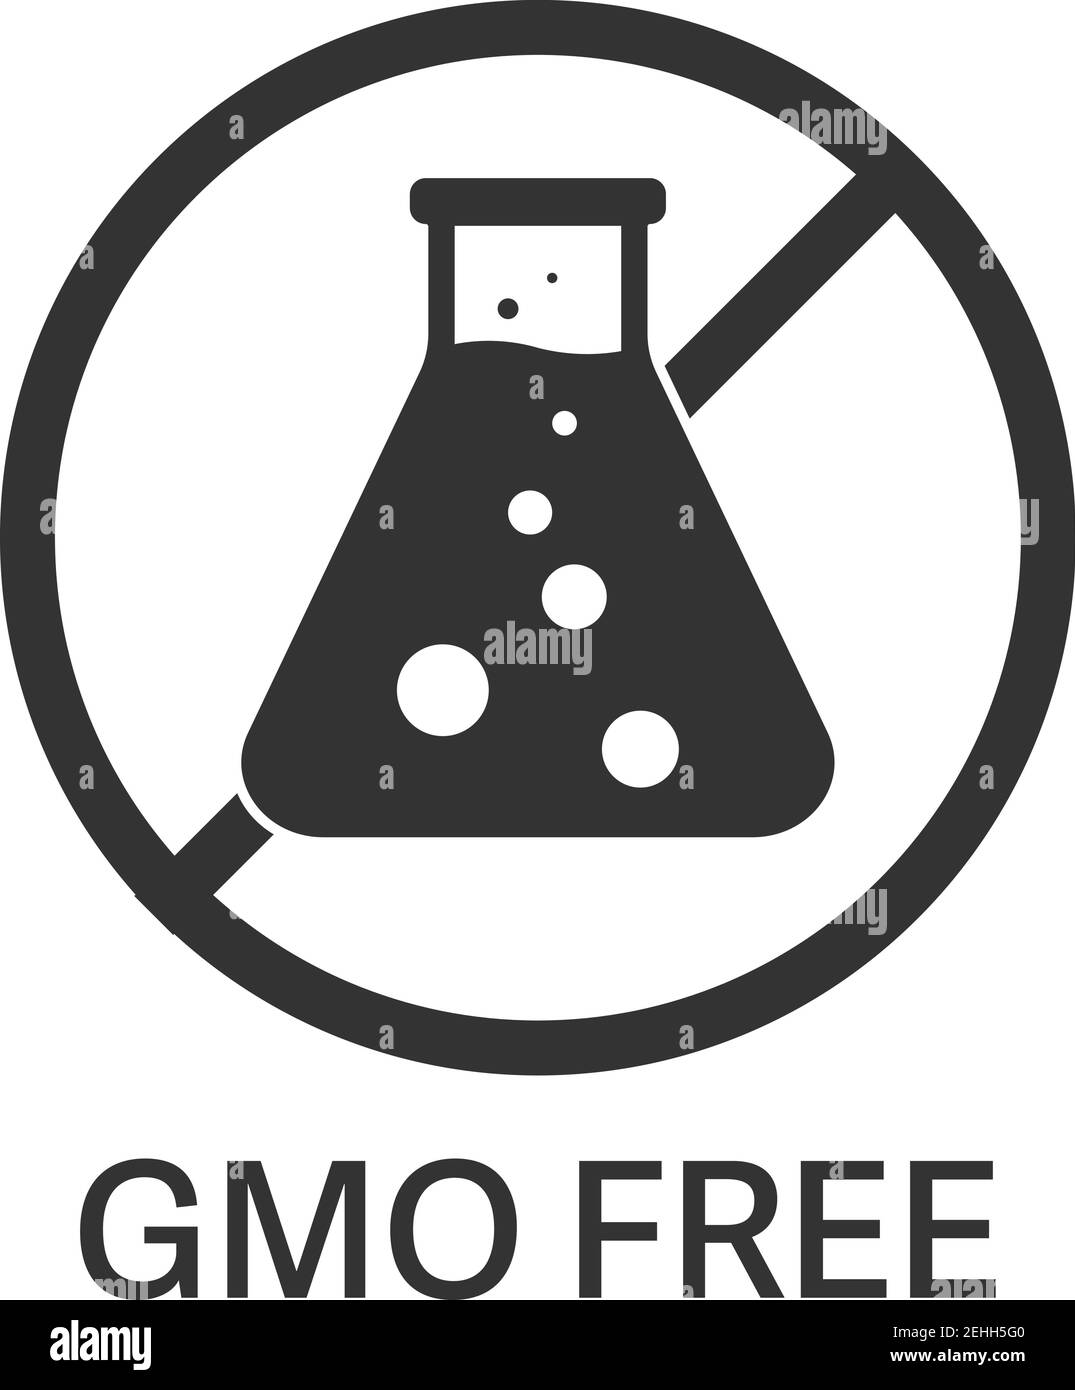 GMO FREE sign or label with test tube vector illustration Stock Vector